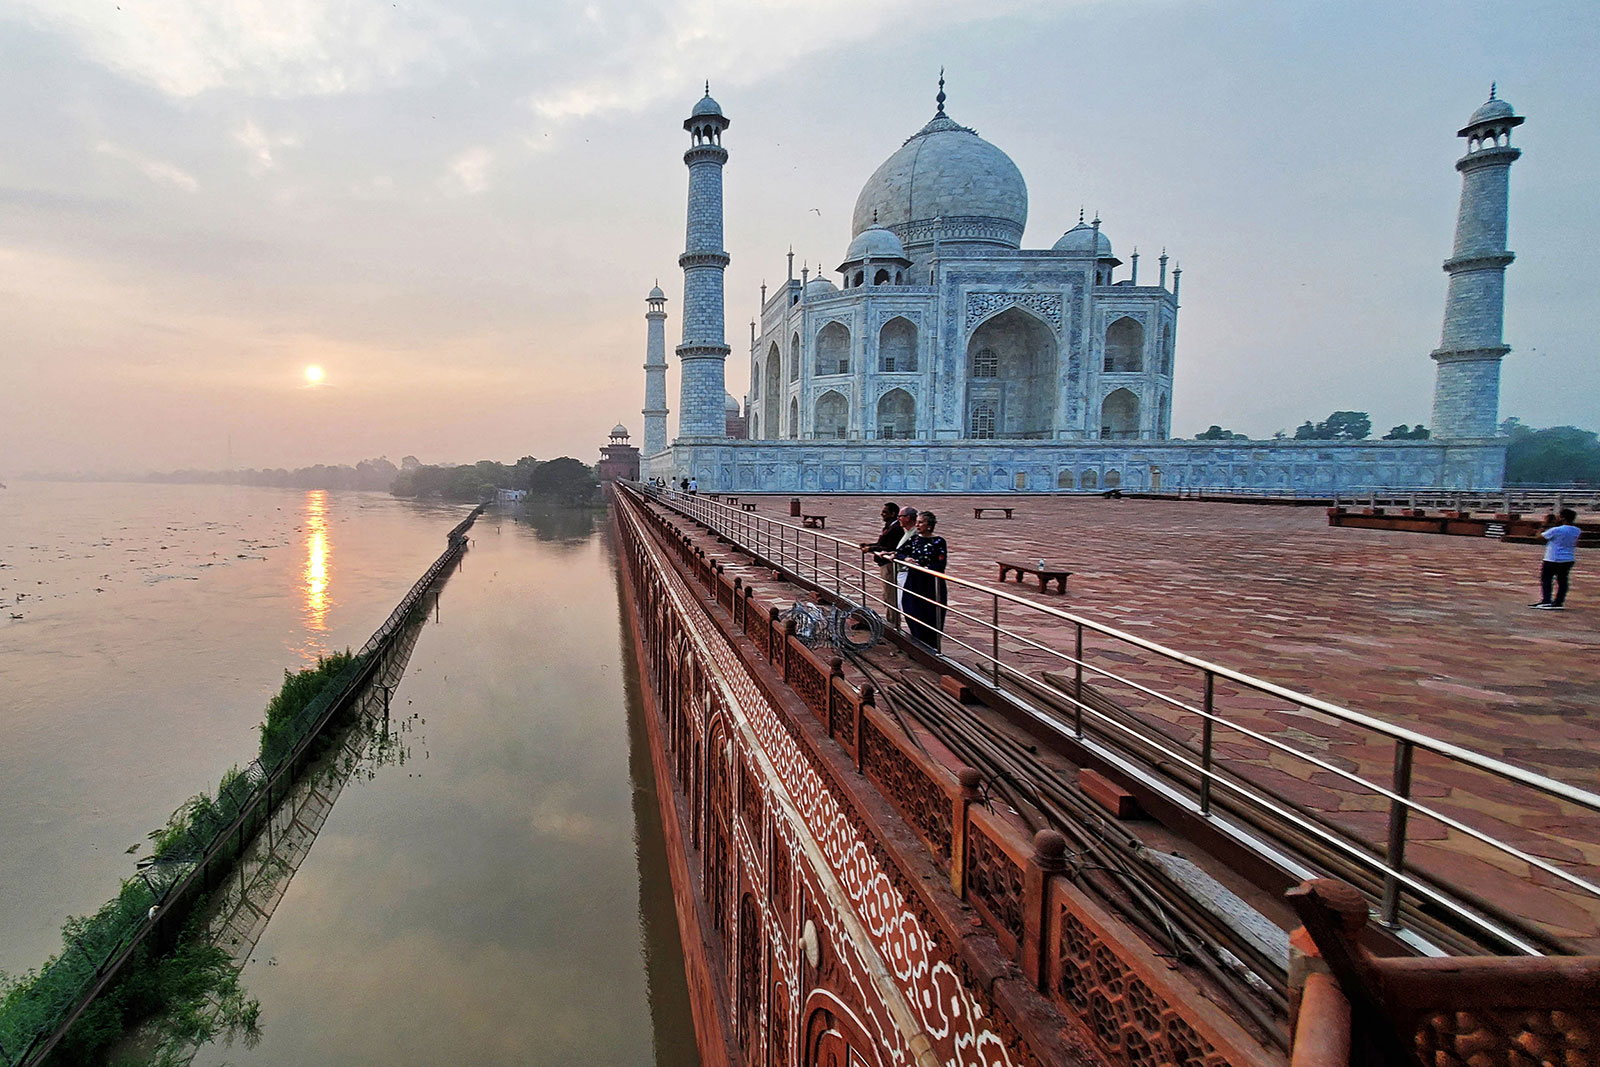 The flooded river banks of the Yamuna are seen along the Taj Mahal in Agra, India, on July 18.